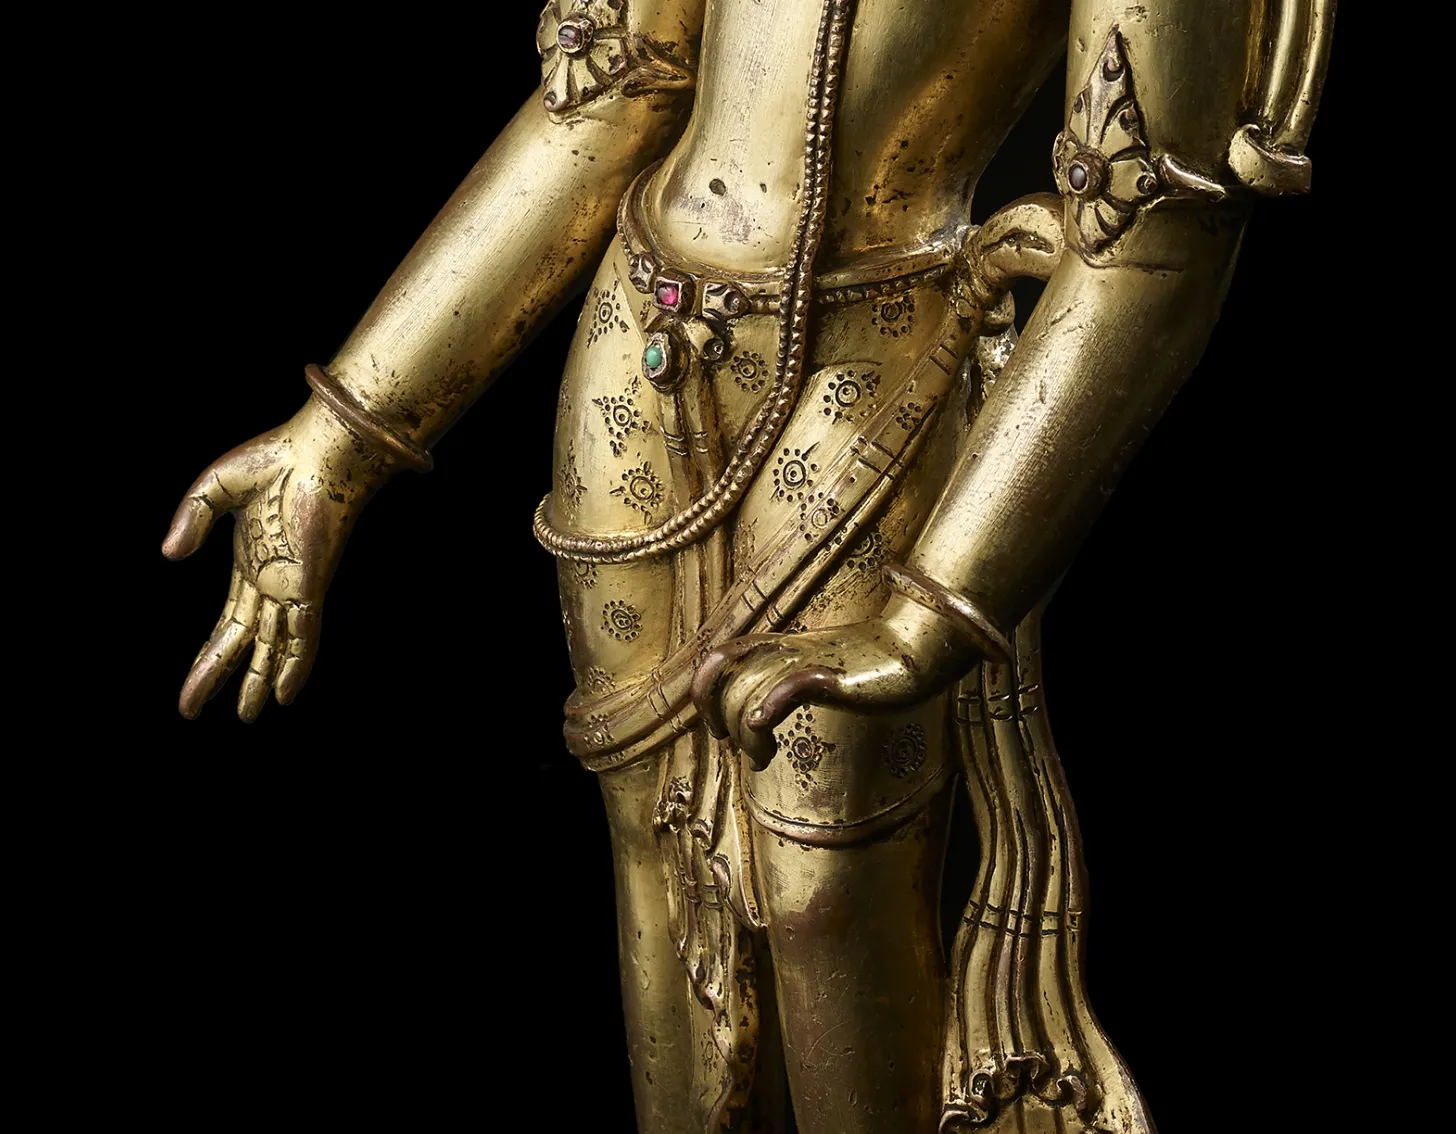 Close up look of : A gilt copper alloy figure of Padmapani